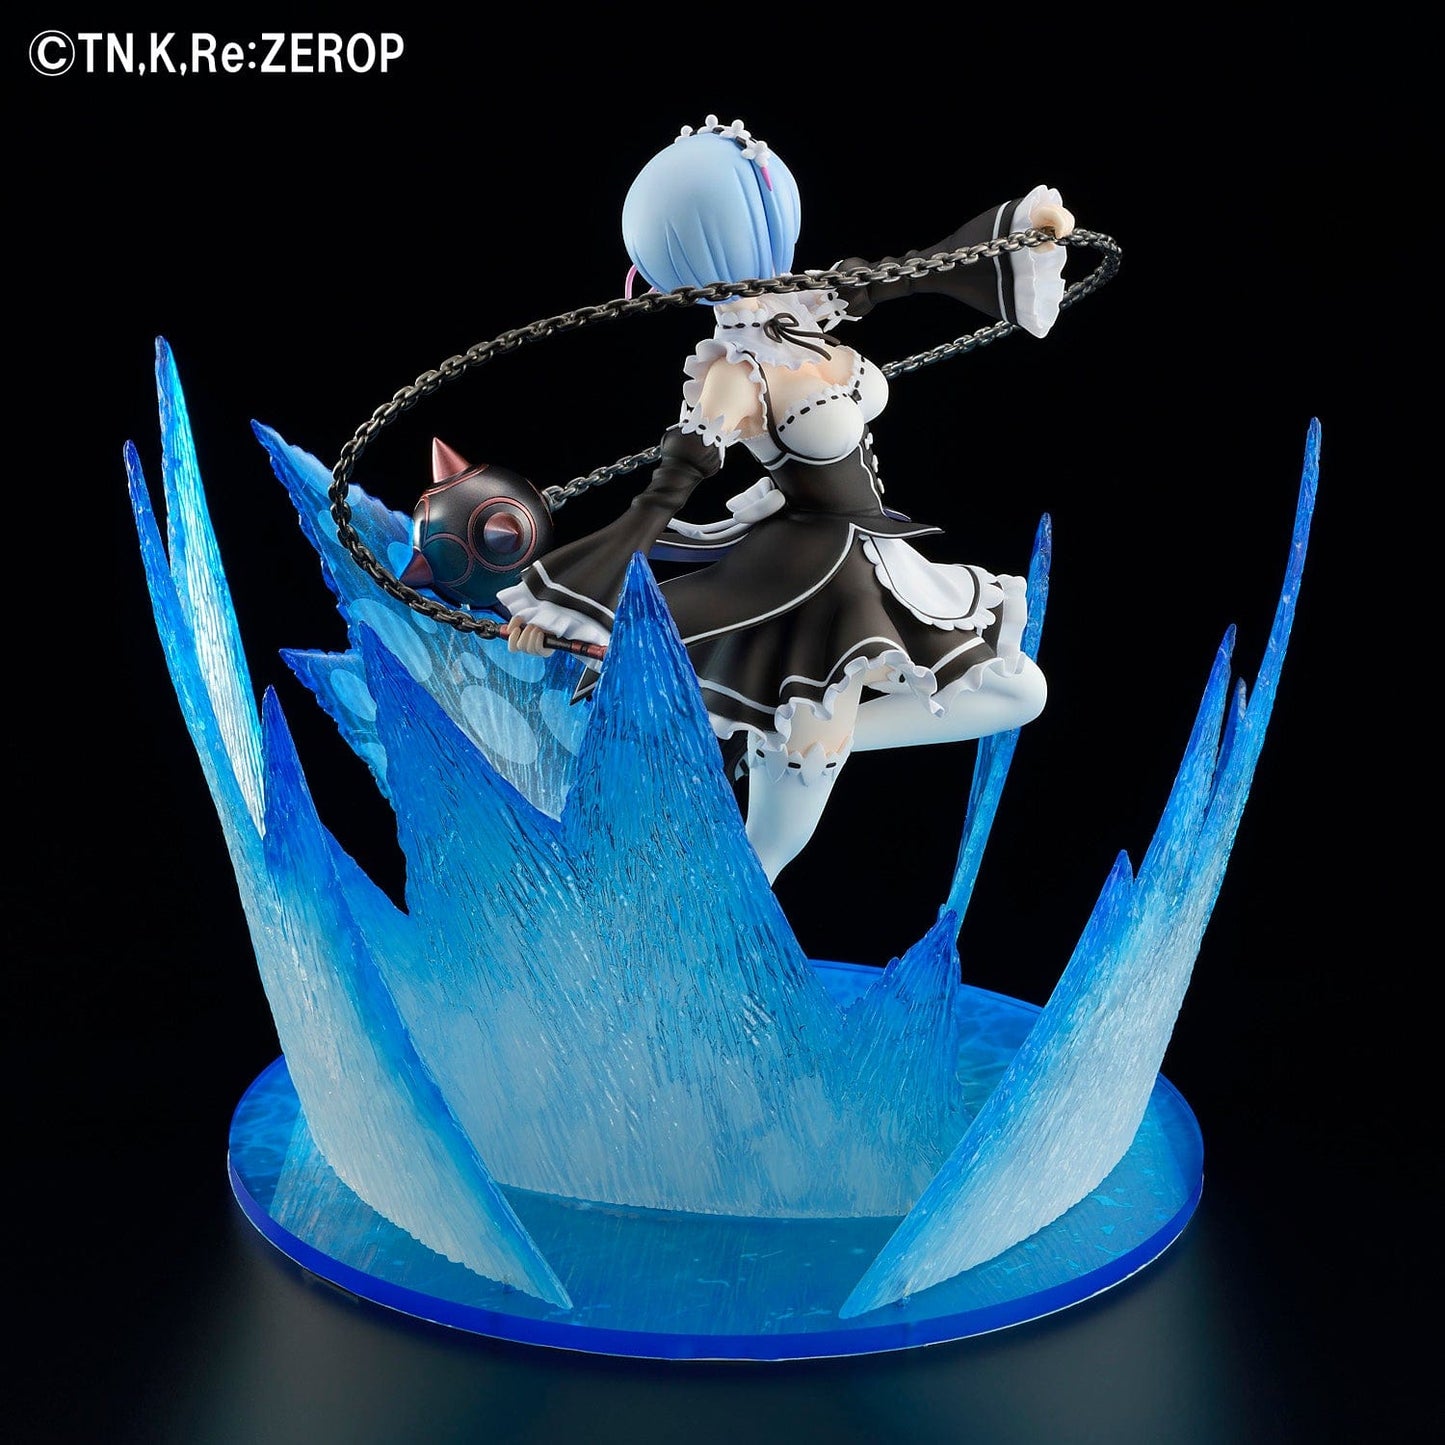 BELLFINE Re:Zero Starting Life in Another World Rem 1/7 Scale Figure